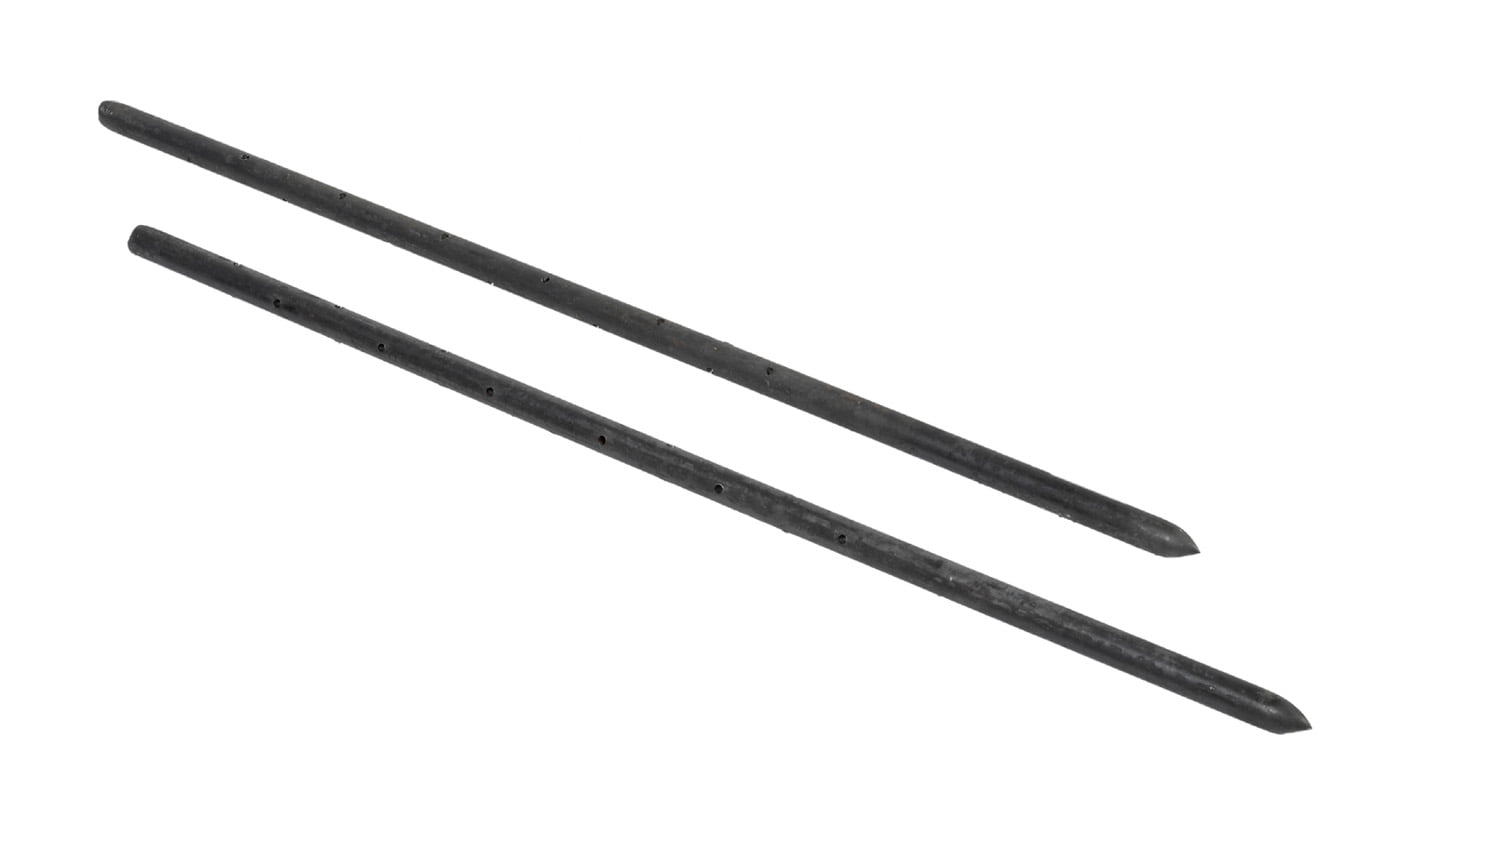 Mutual Industries 7500-0-30 Nail Stake with Holes, 30